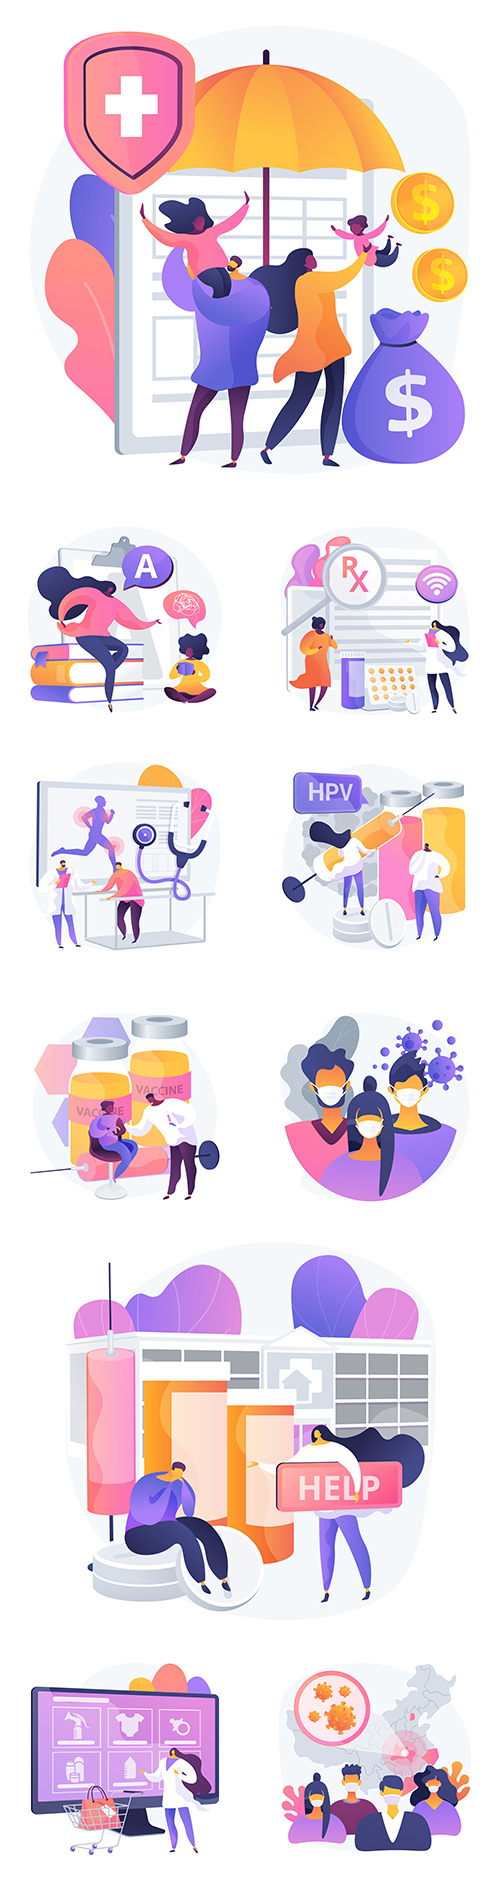 People and medicine flat and gradient design illustrations
